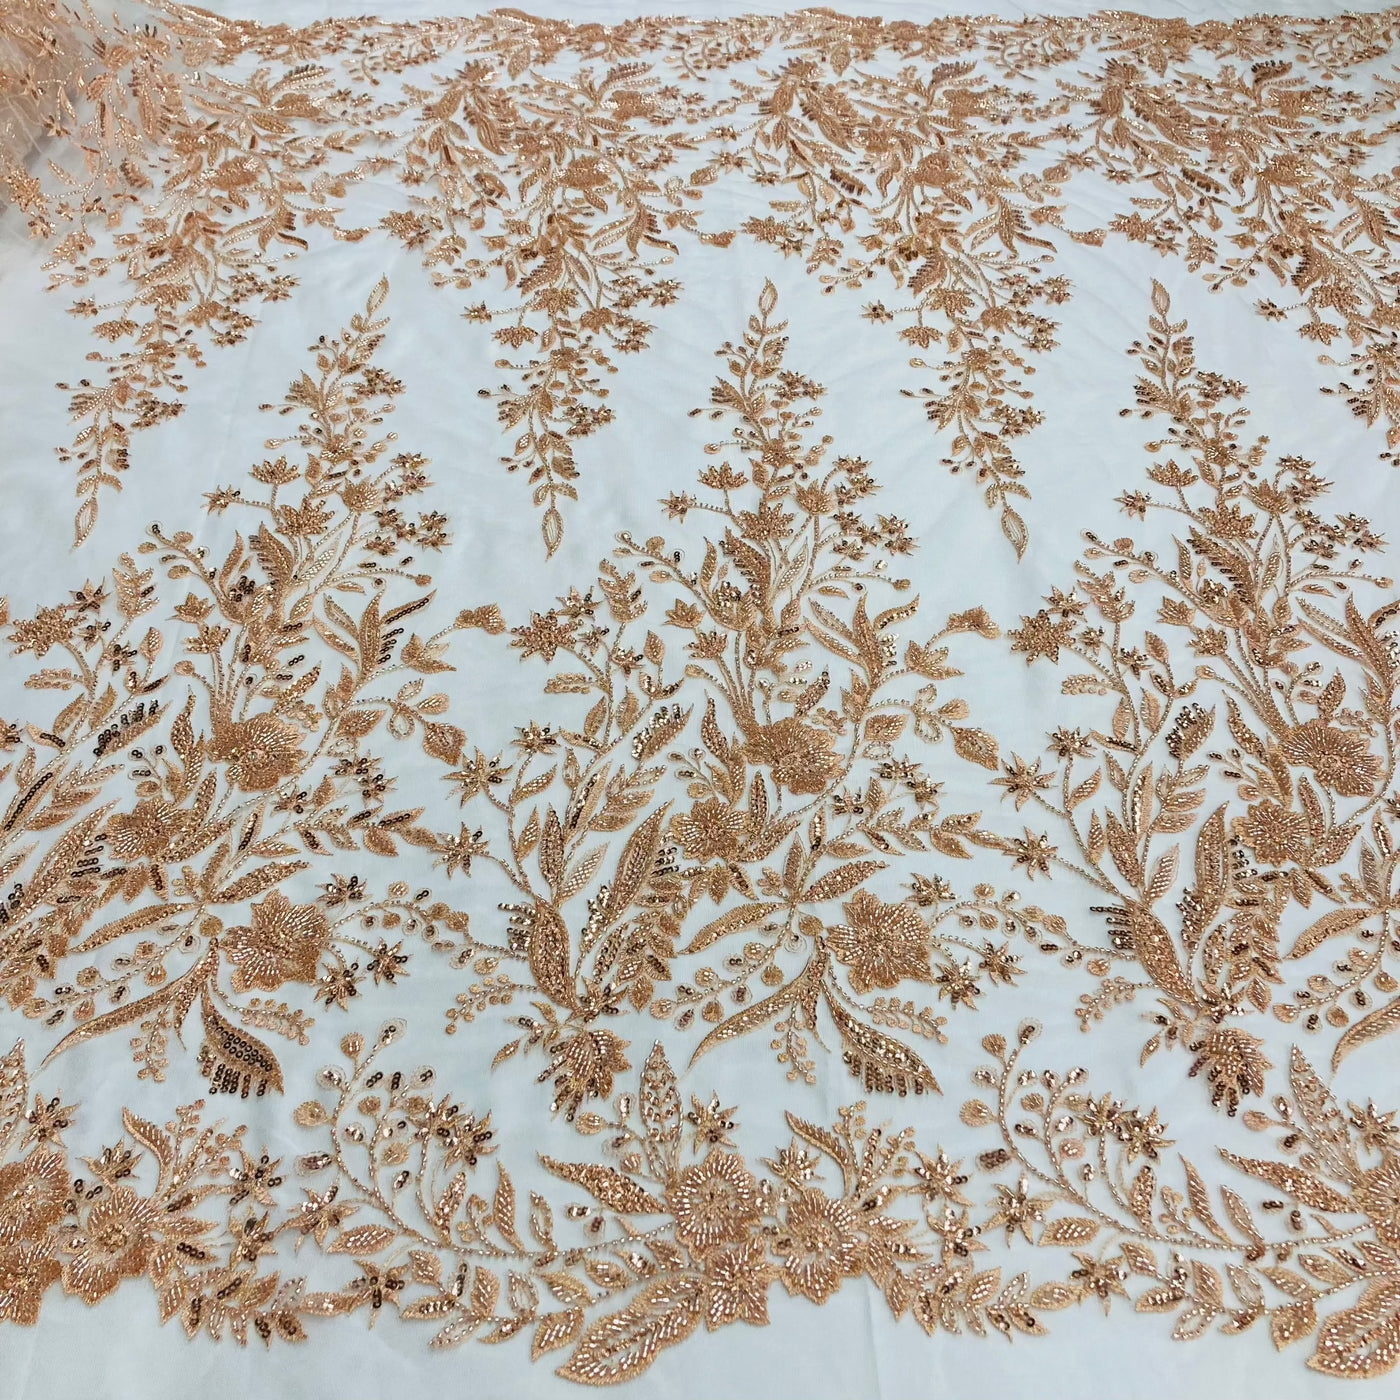 Beaded Lace Fabric Embroidered on 100% Polyester Net Mesh | Lace USA - GD-12992